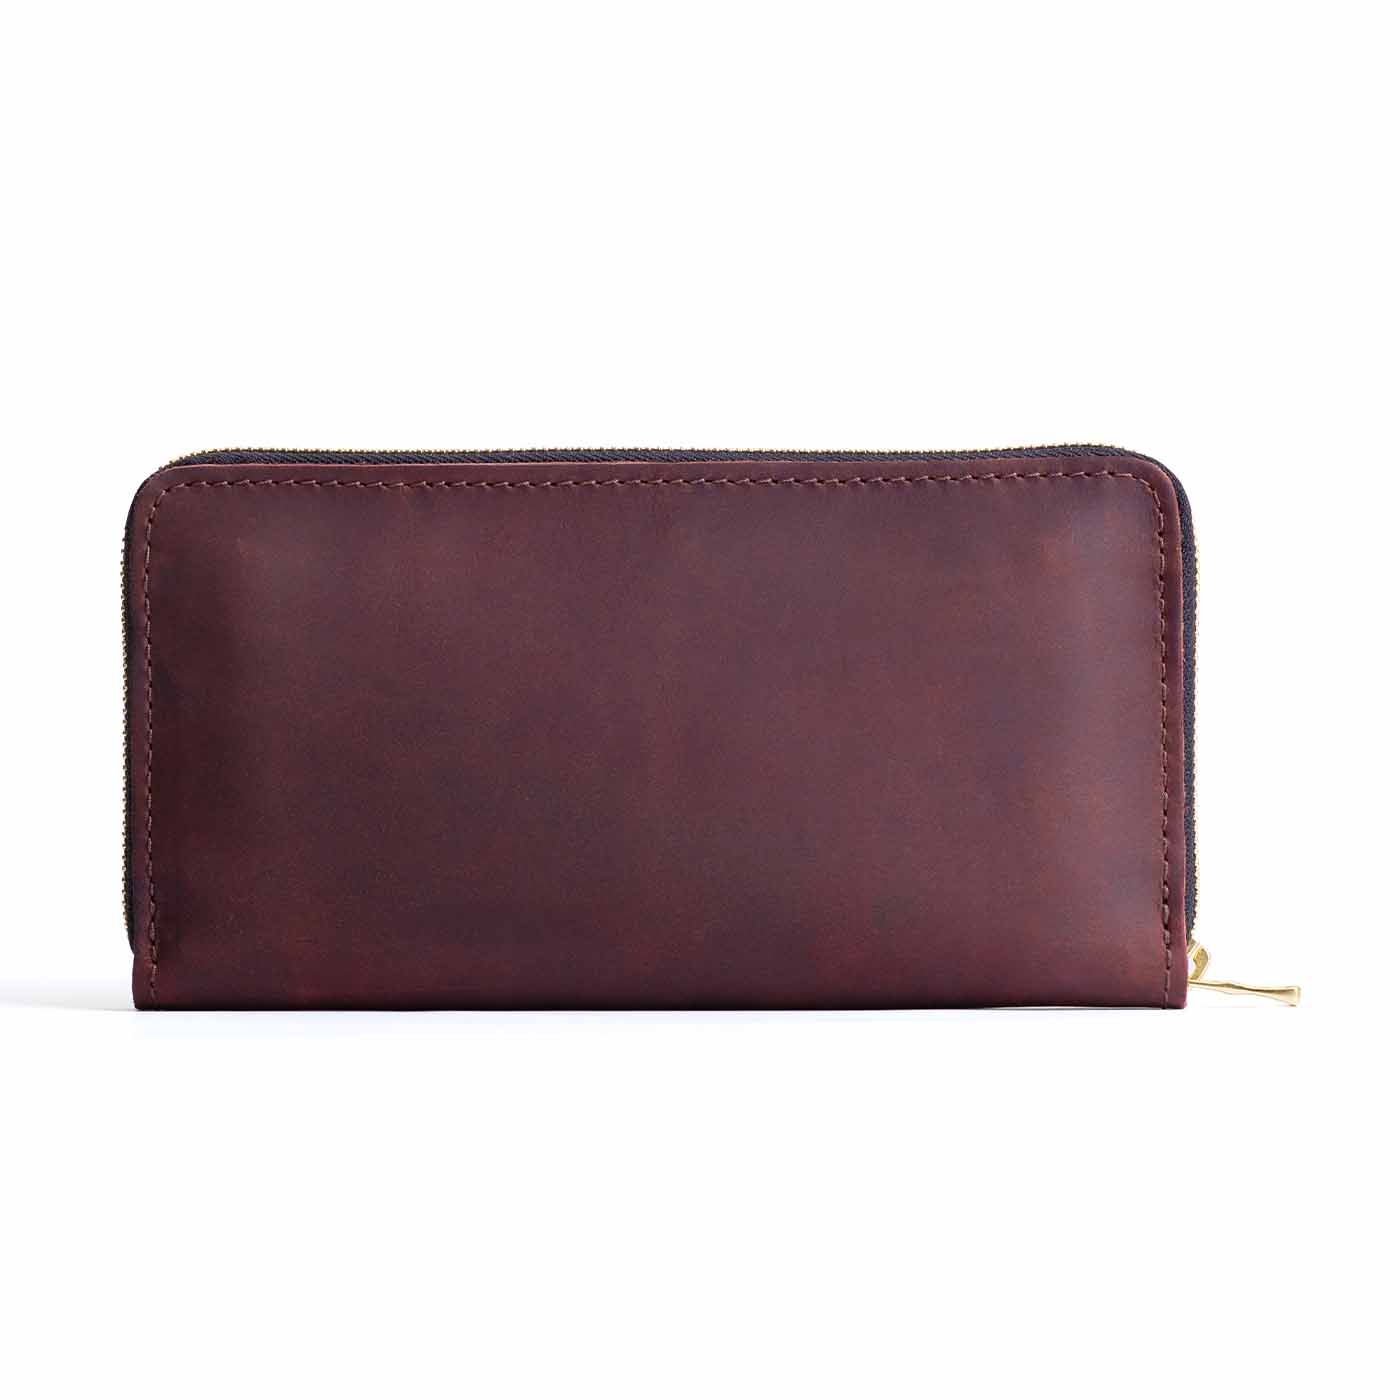 All Color: Merlot | leather handmade wallet